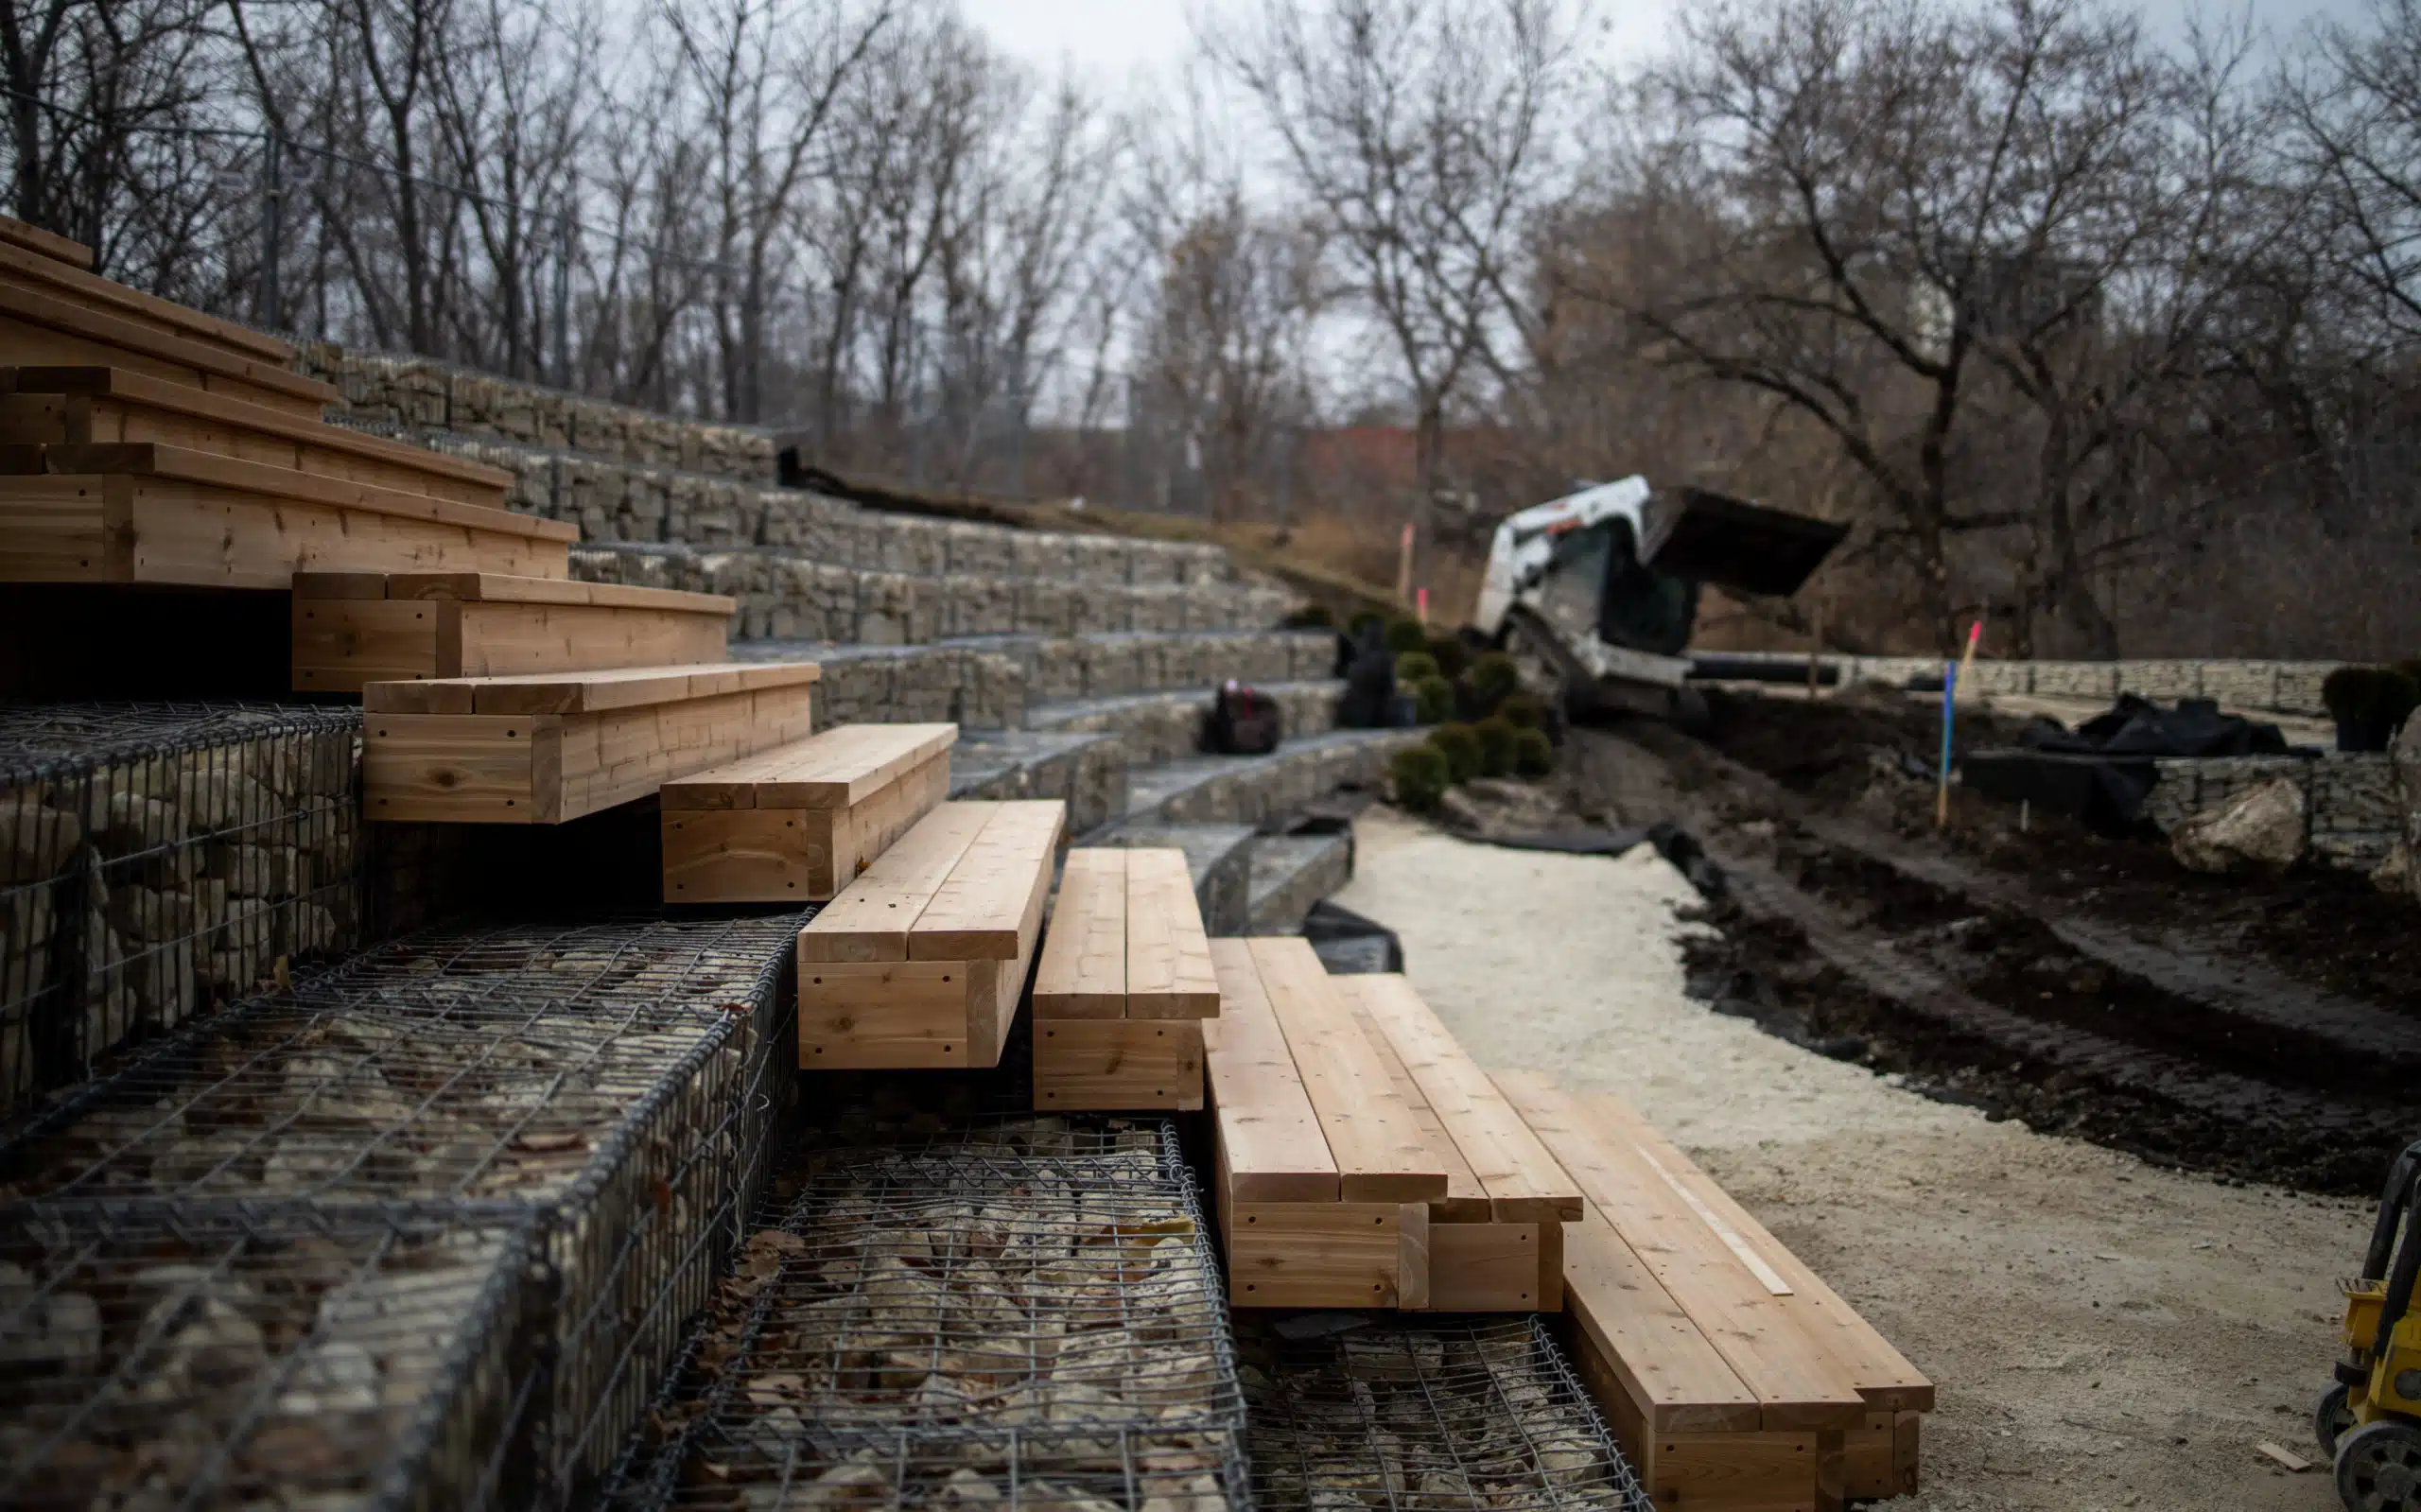 Outdoor amphitheater under construction with wood benches and stone retaining walls